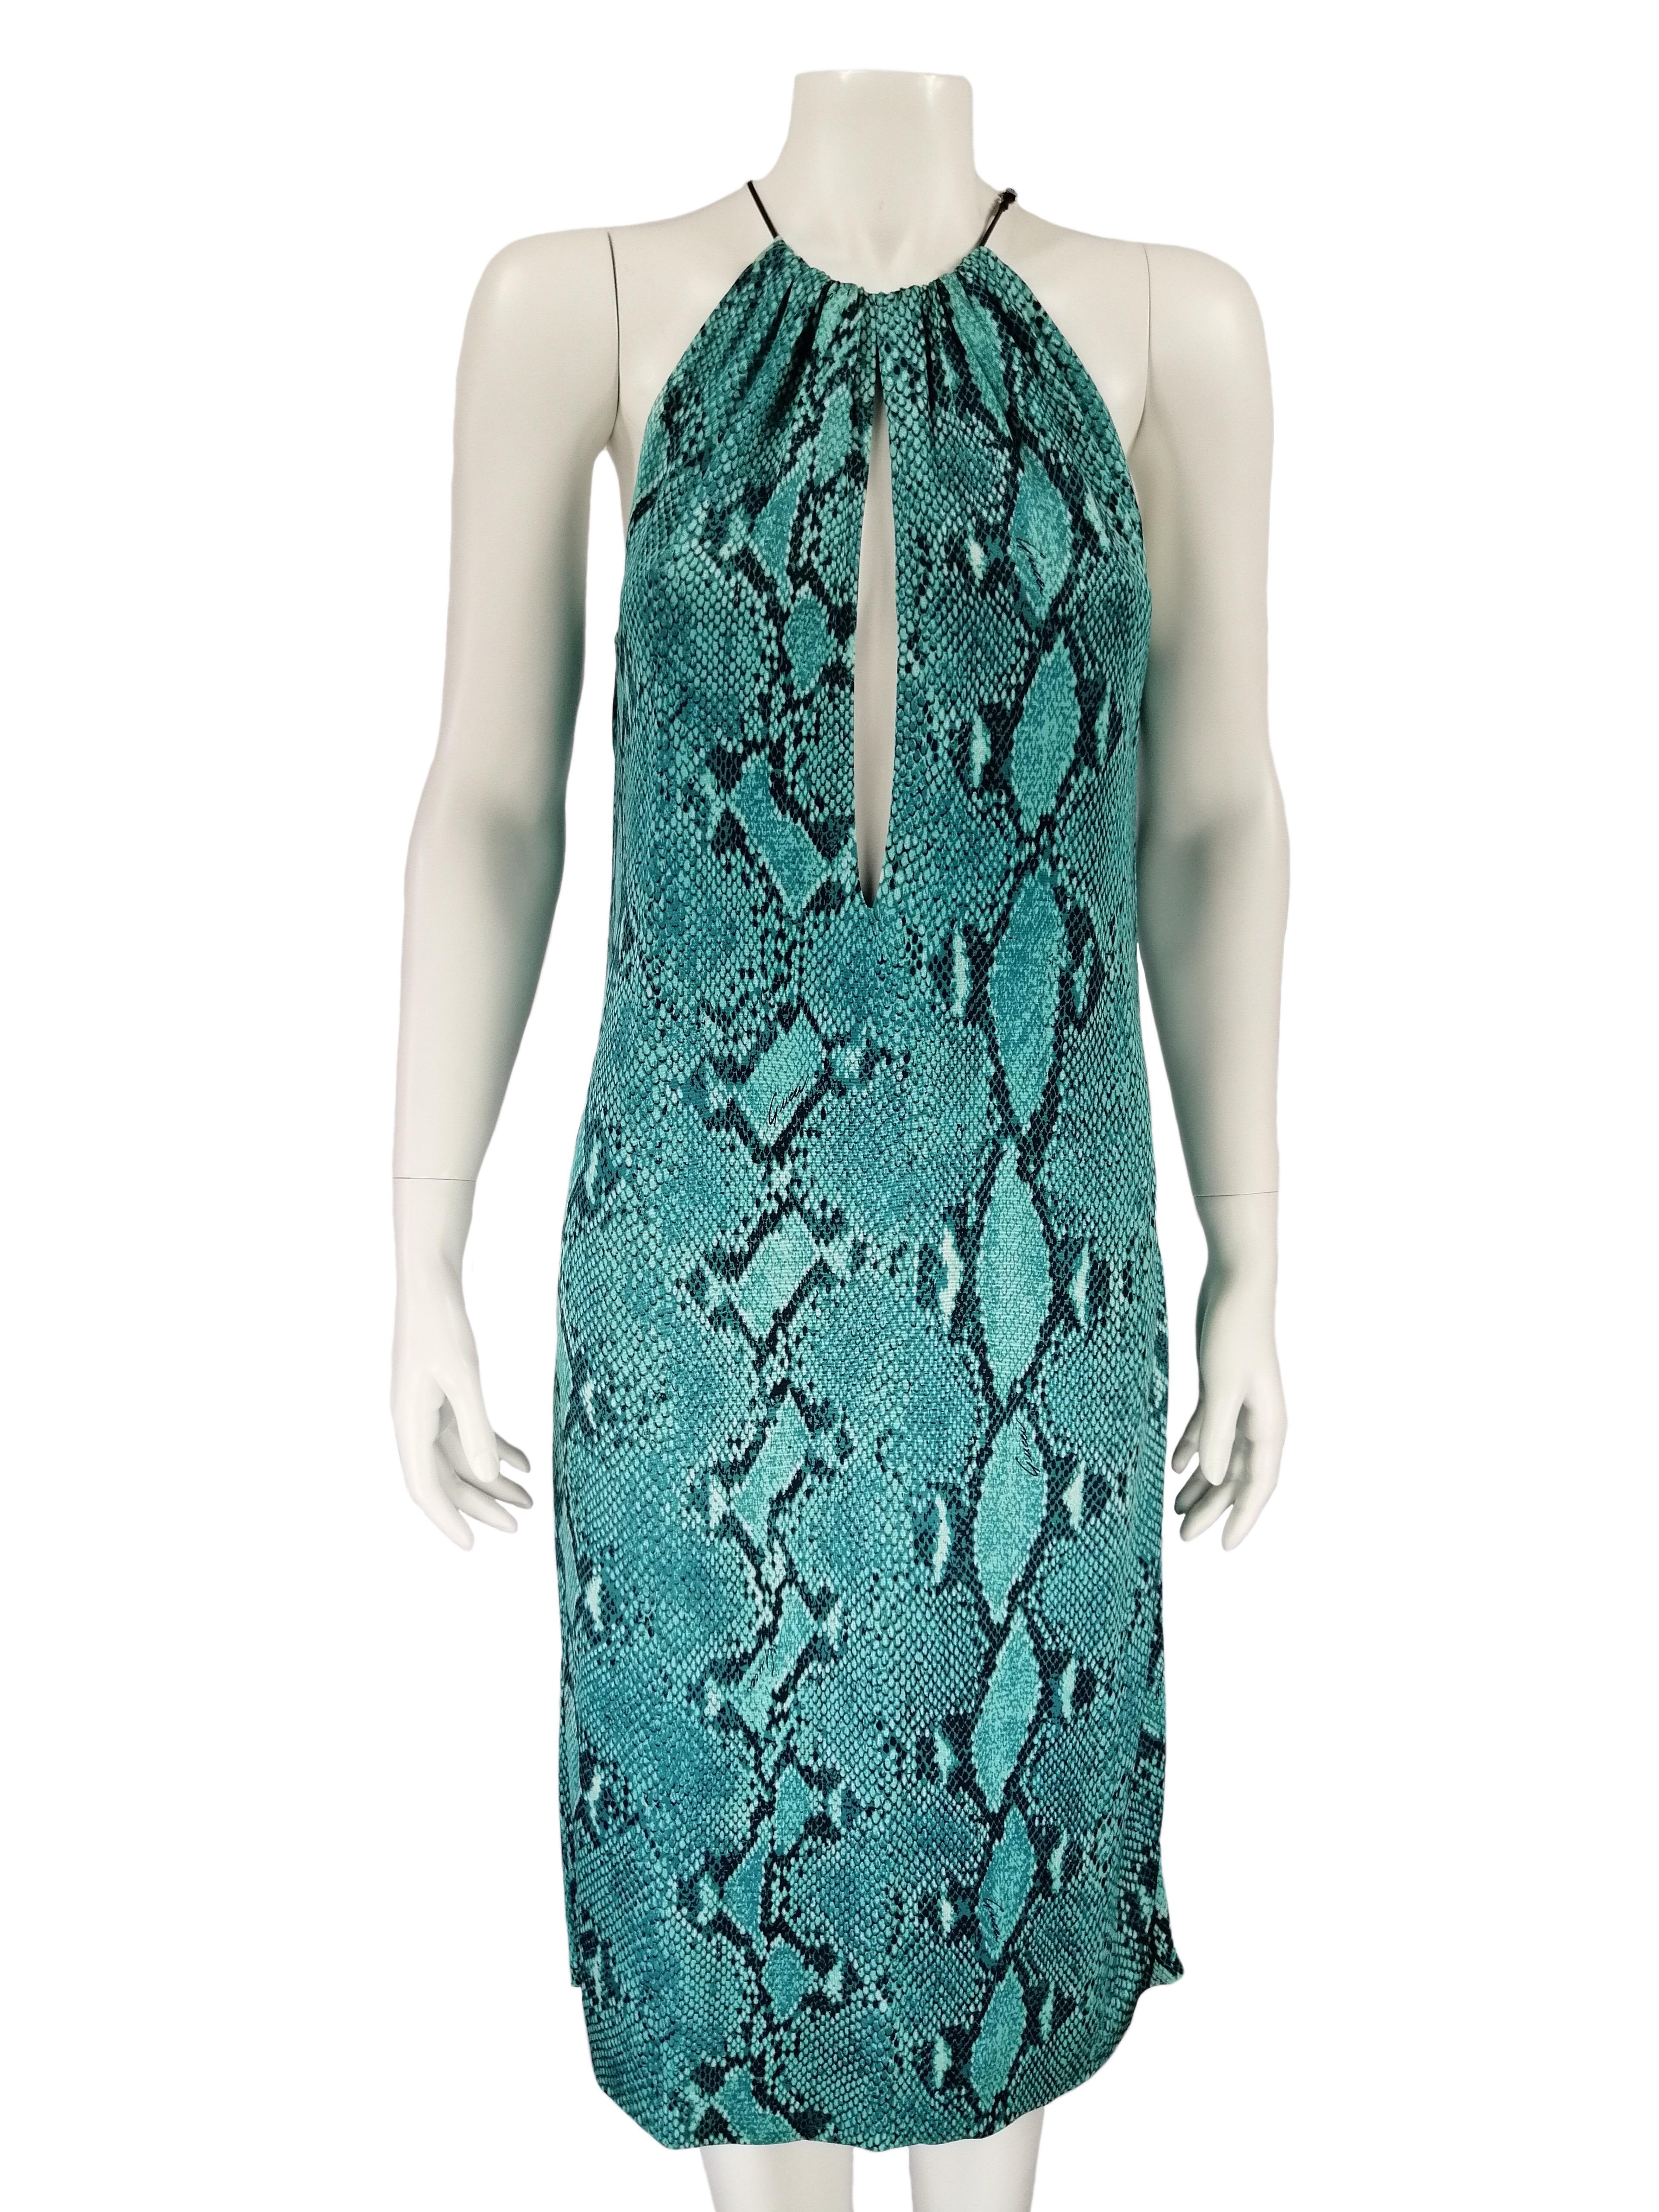 GUCCI
PERIOD: TOM FORD S/S 2000 Collection
Python print halter neck turquoise dress
Size IT 44
Made in Italy
100% viscose
Flat measures:
Length cm. 100
Bust cm. 44
Excellent condition